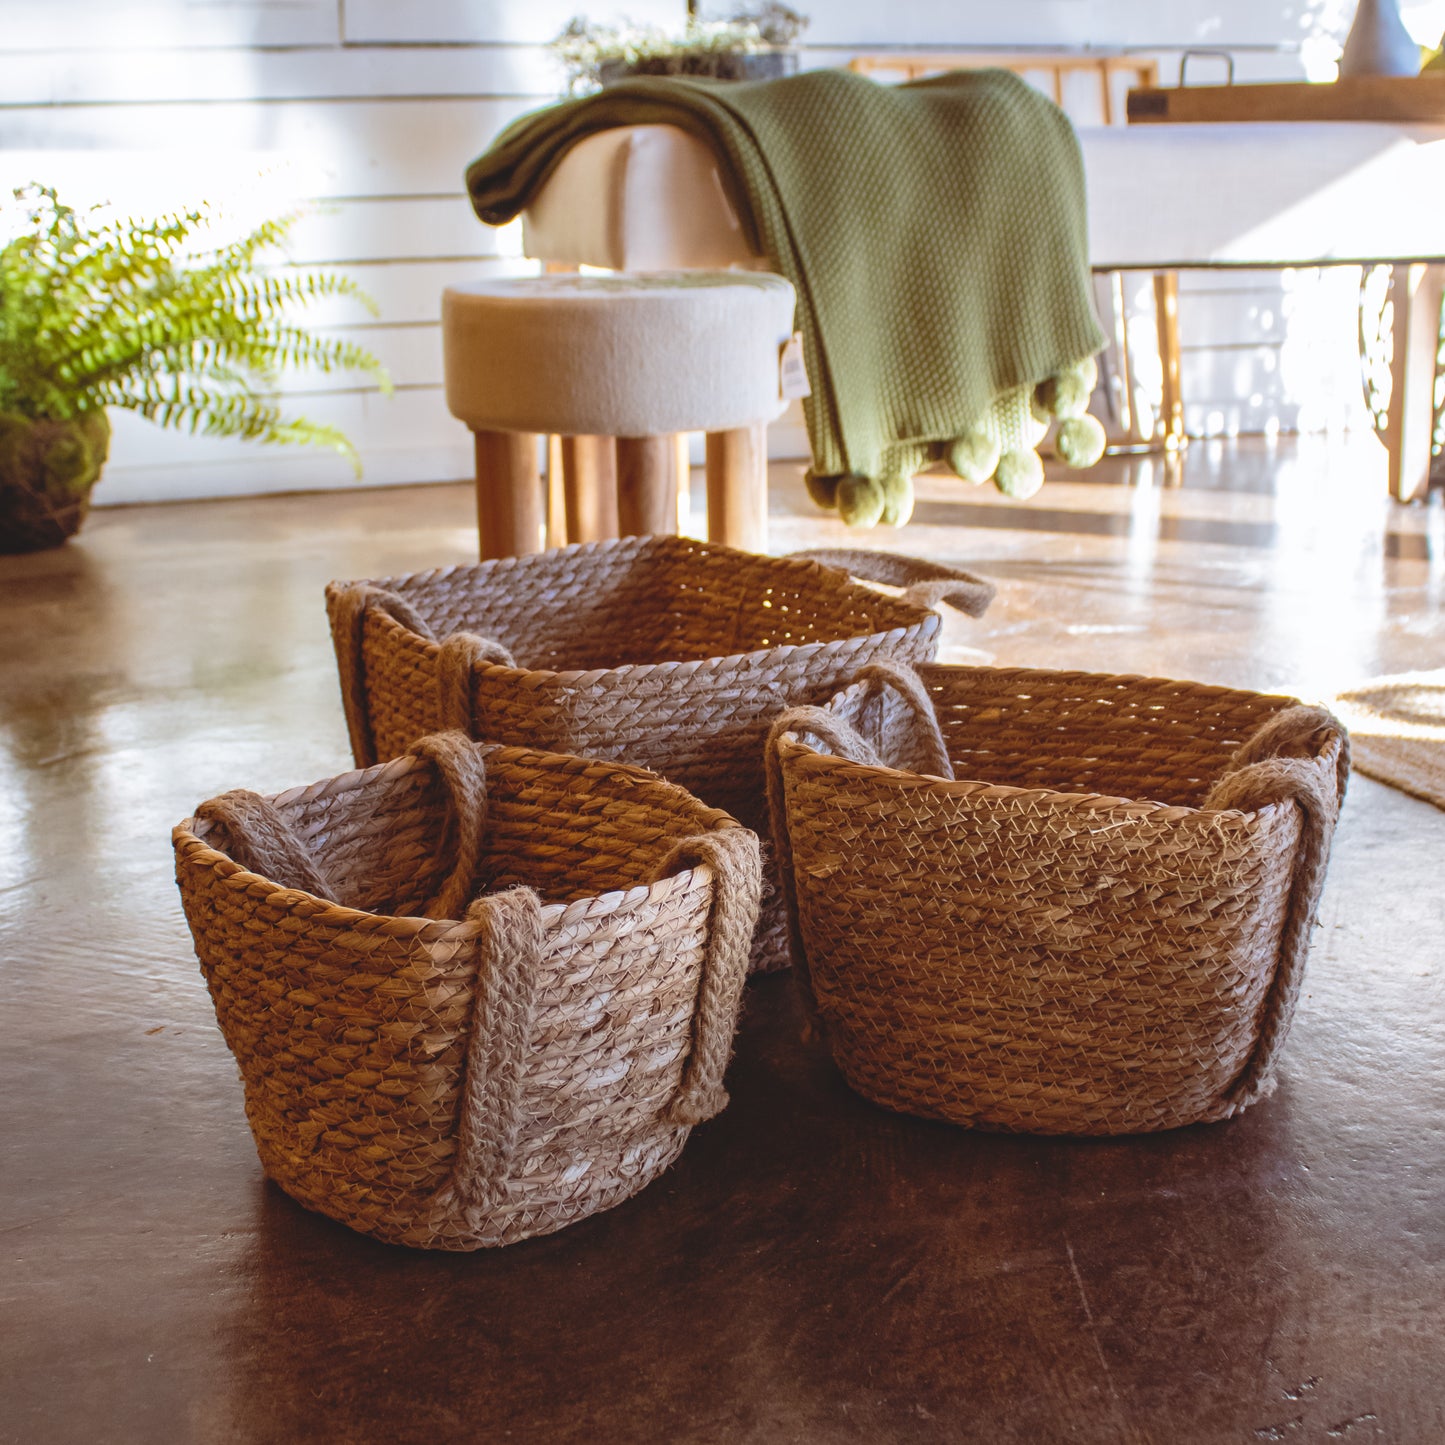 Square Seagrass Baskets w/ Handles